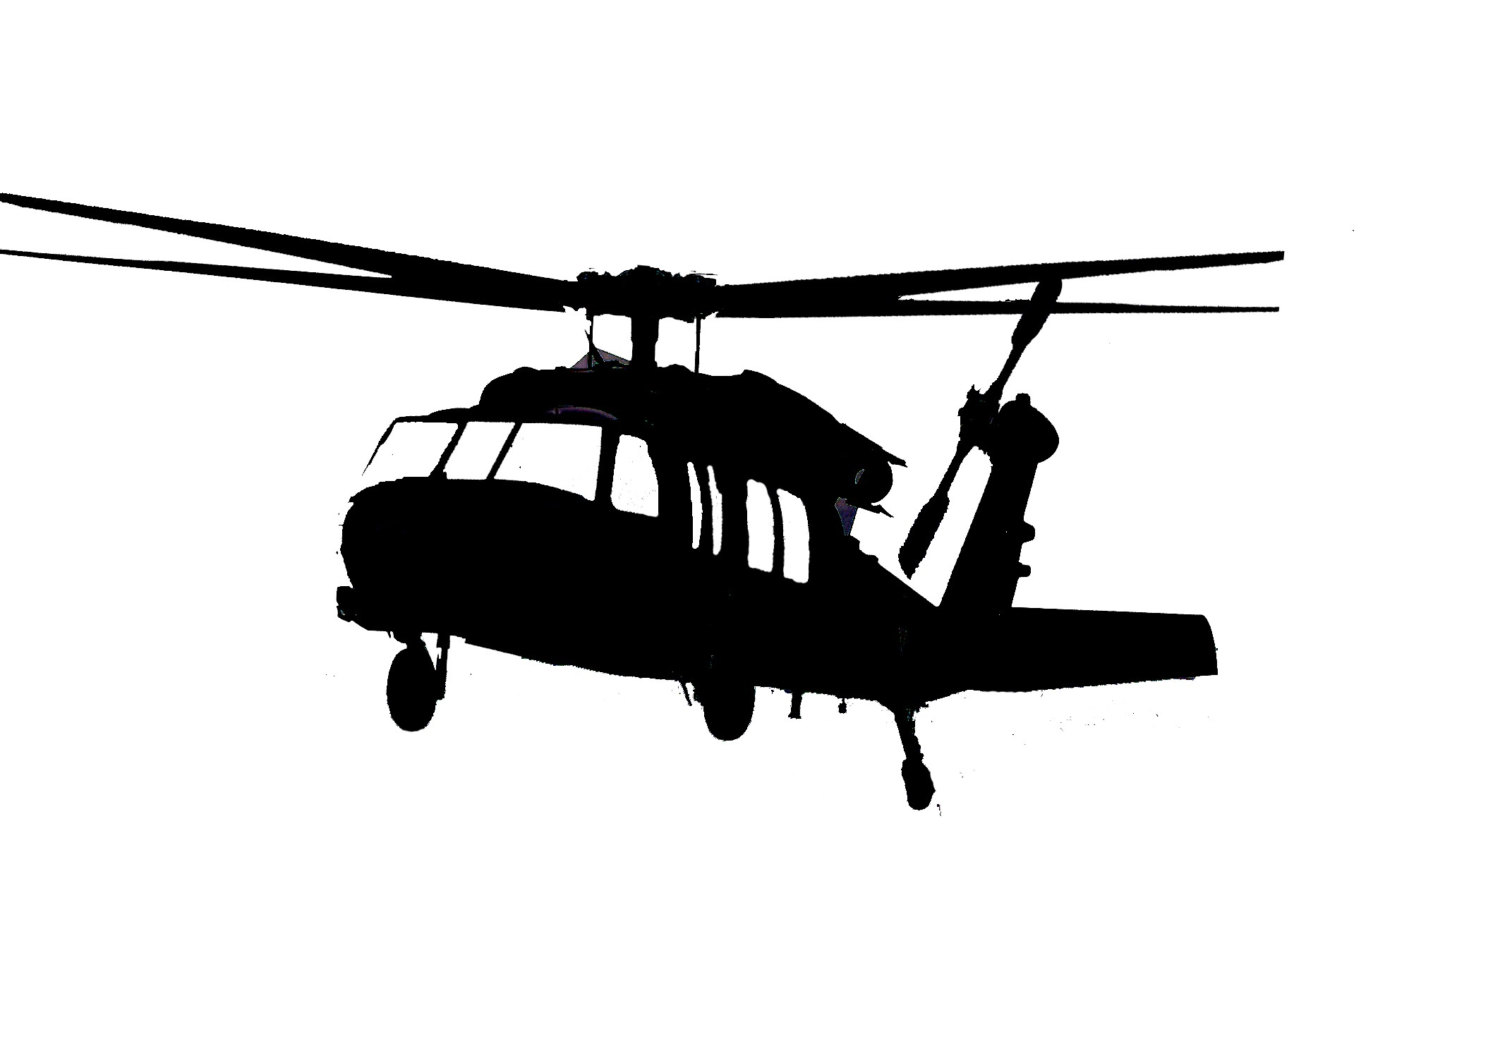 Clip Arts Related To : Helicopter Clip art Bell UH-1 Iroquois Silhouette Si...